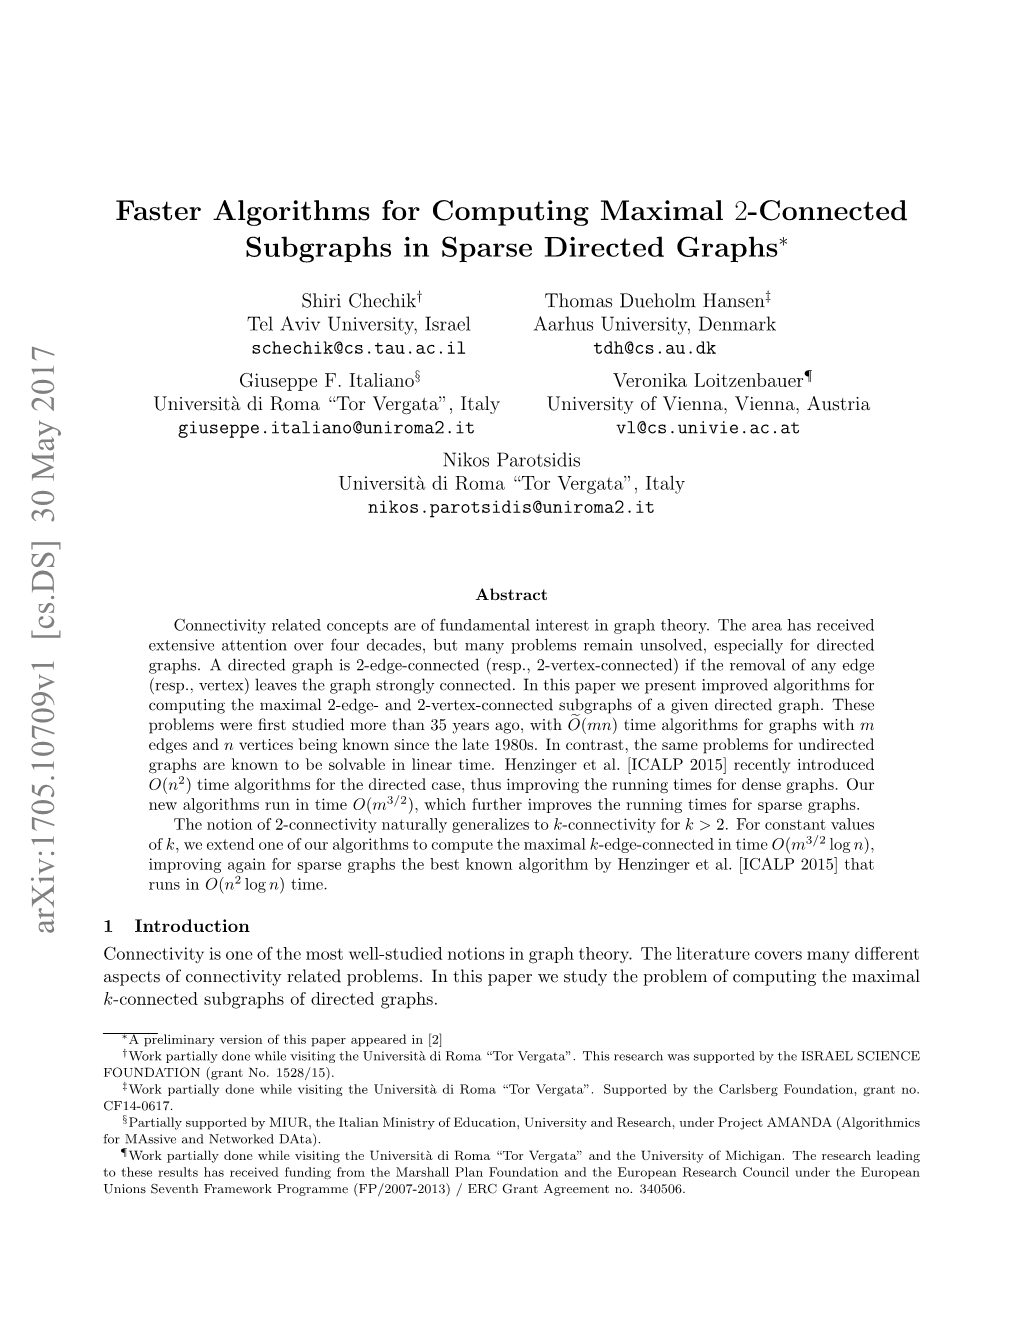 Faster Algorithms for Computing Maximal 2-Connected Subgraphs in Sparse Directed Graphs∗